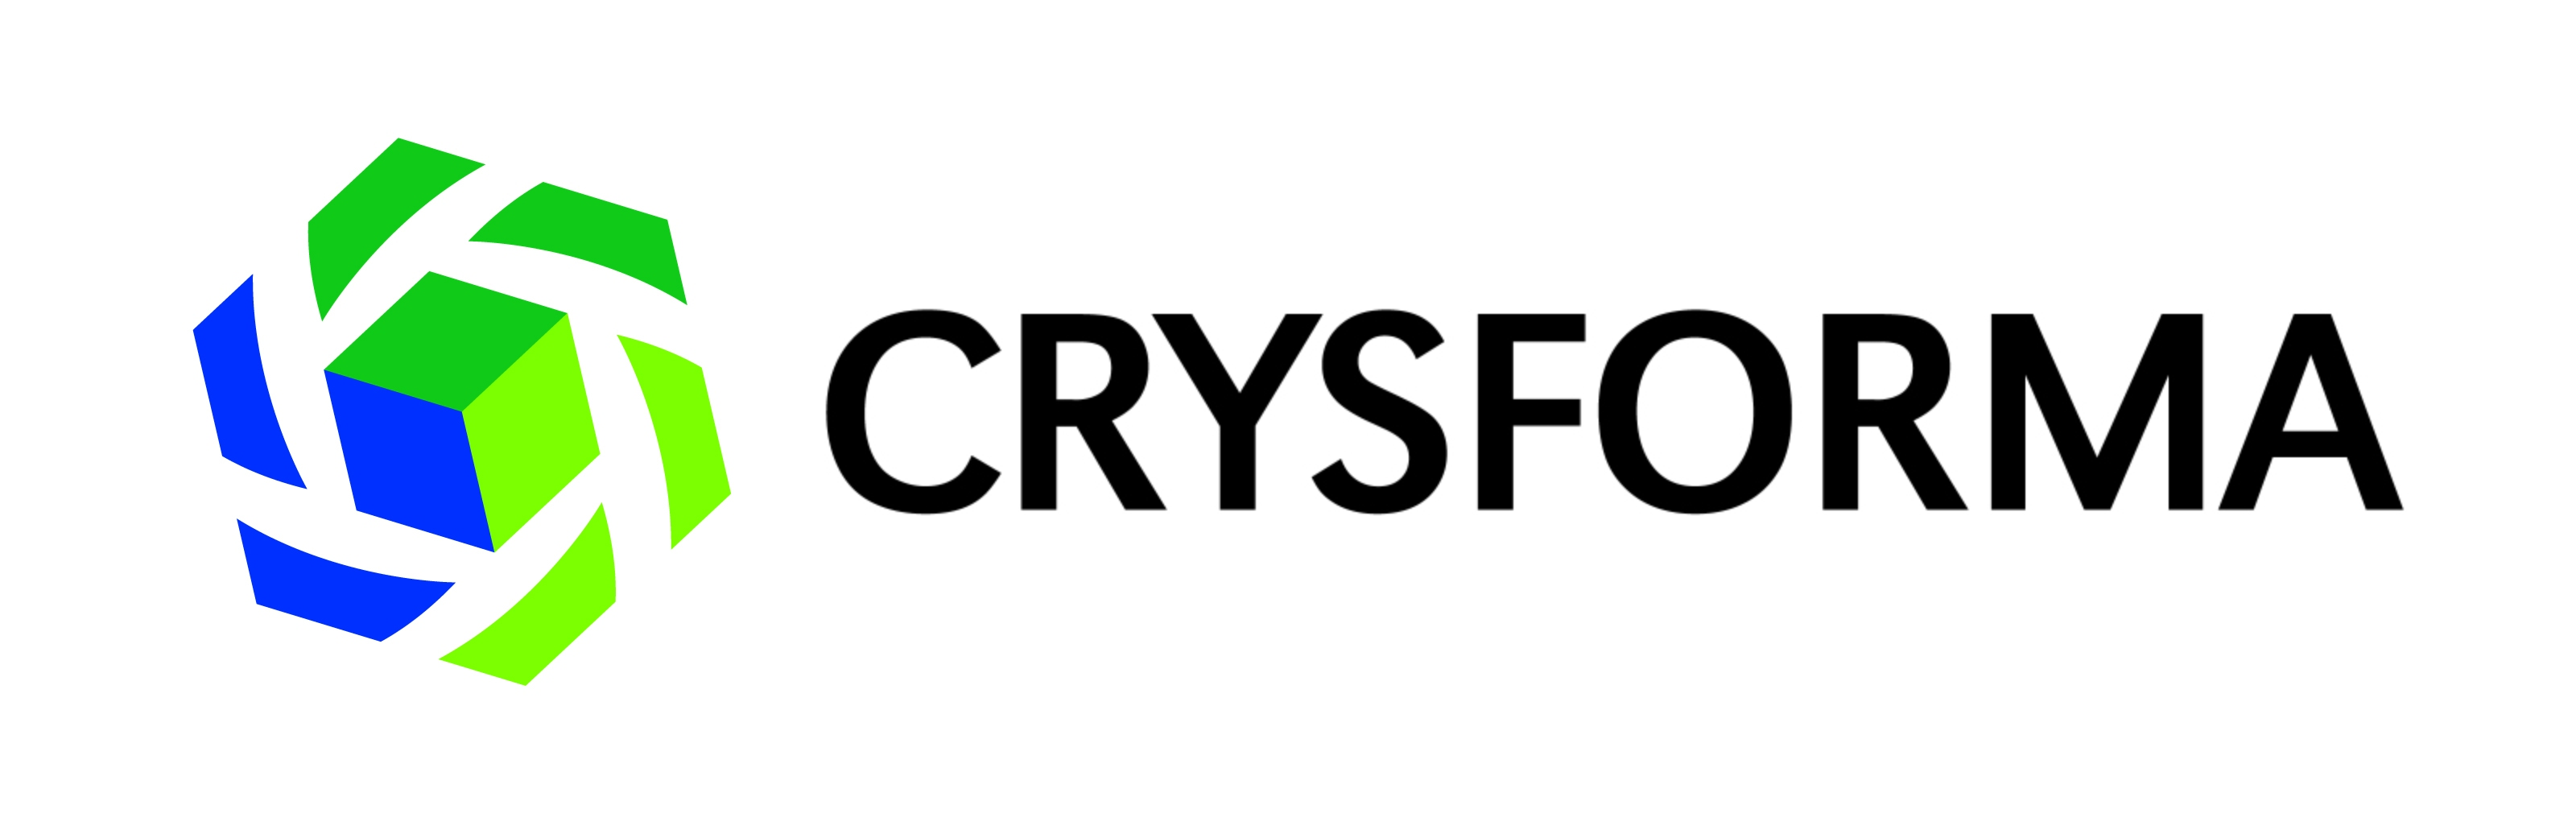 Crysforma: services in pharmaceutical solid state development